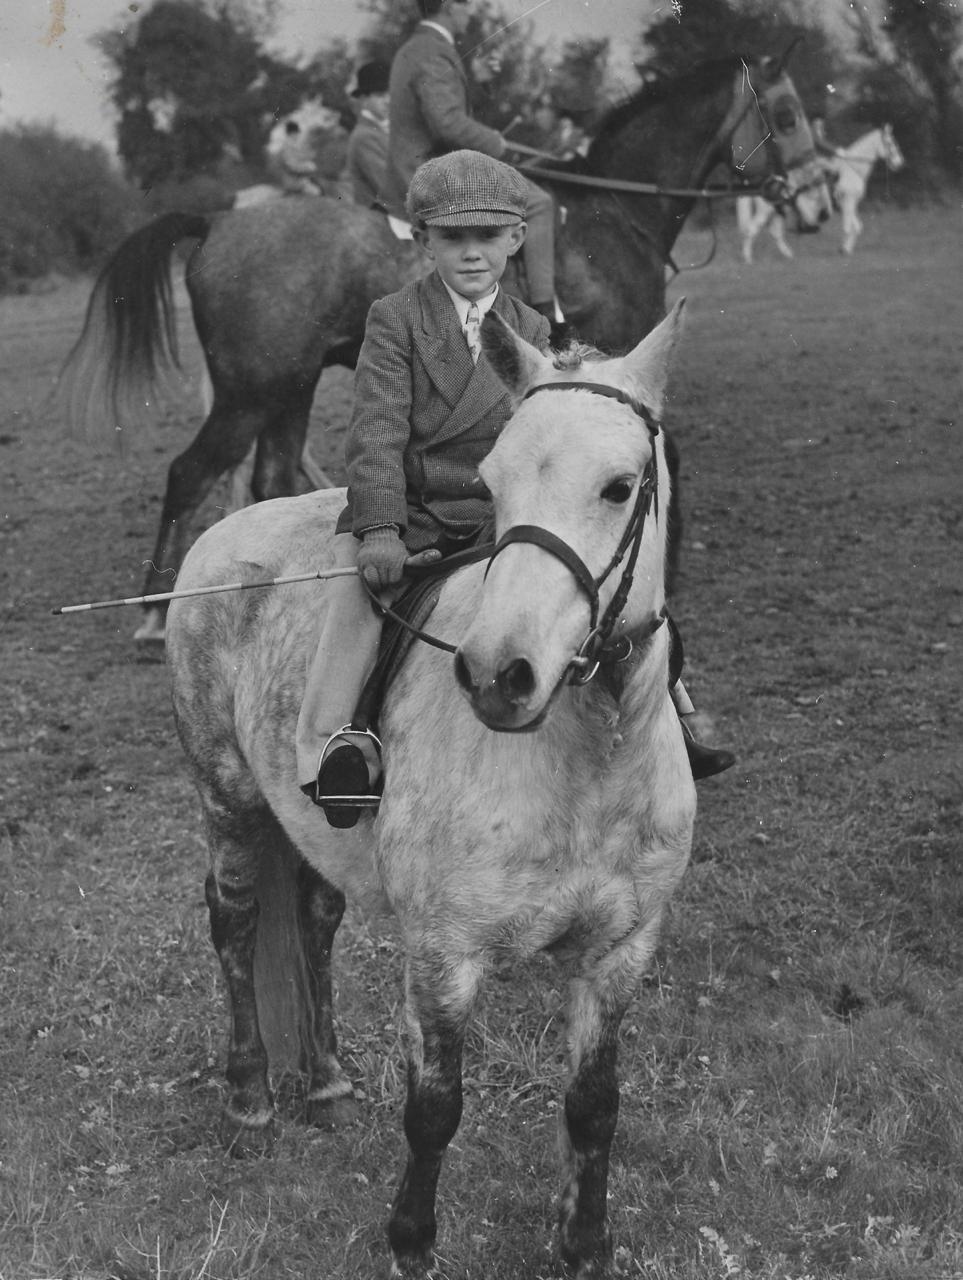 Early potential: The young Pat Buckley aboard a pony at home in Ireland